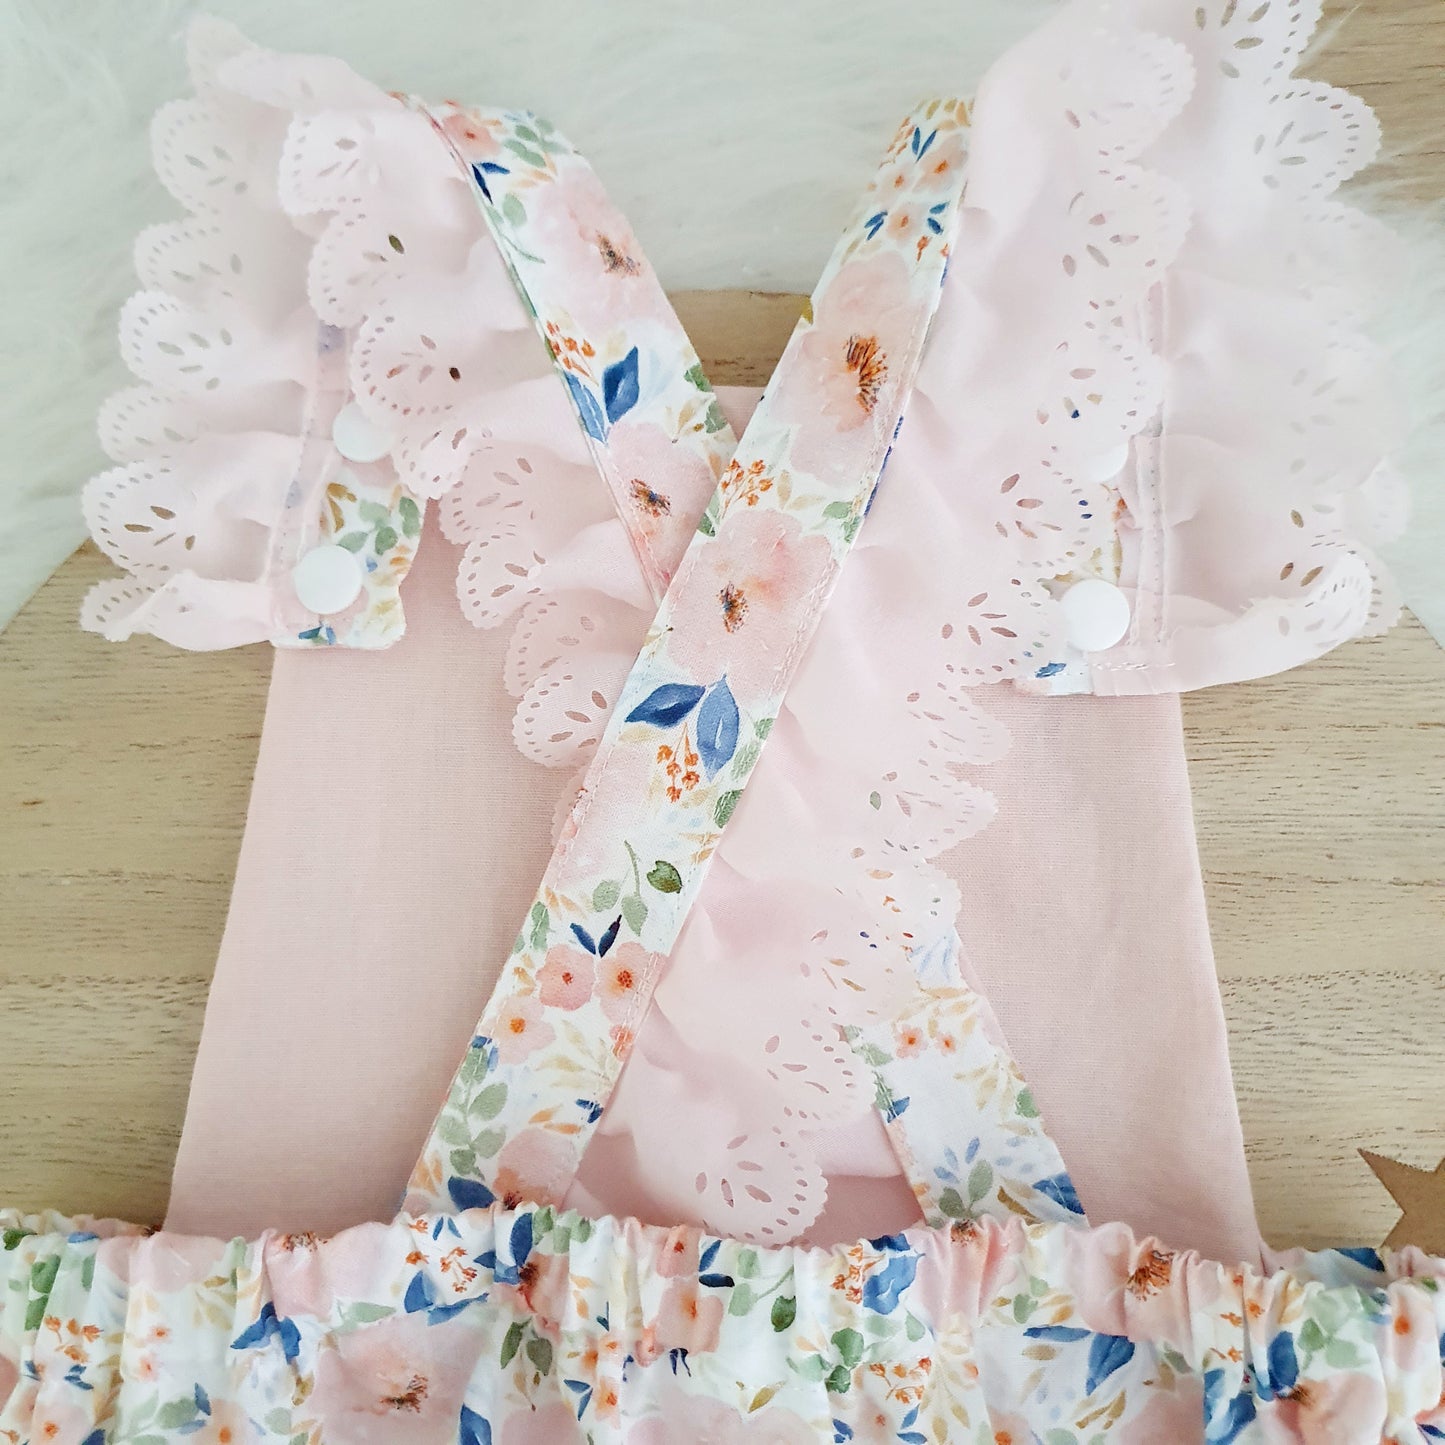 PEACHY BLOOMS Baby Romper with trim, Handmade Baby Clothing, Size 1 - 1st Birthday Clothing / Cake Smash Outfit, 12 - 18 months